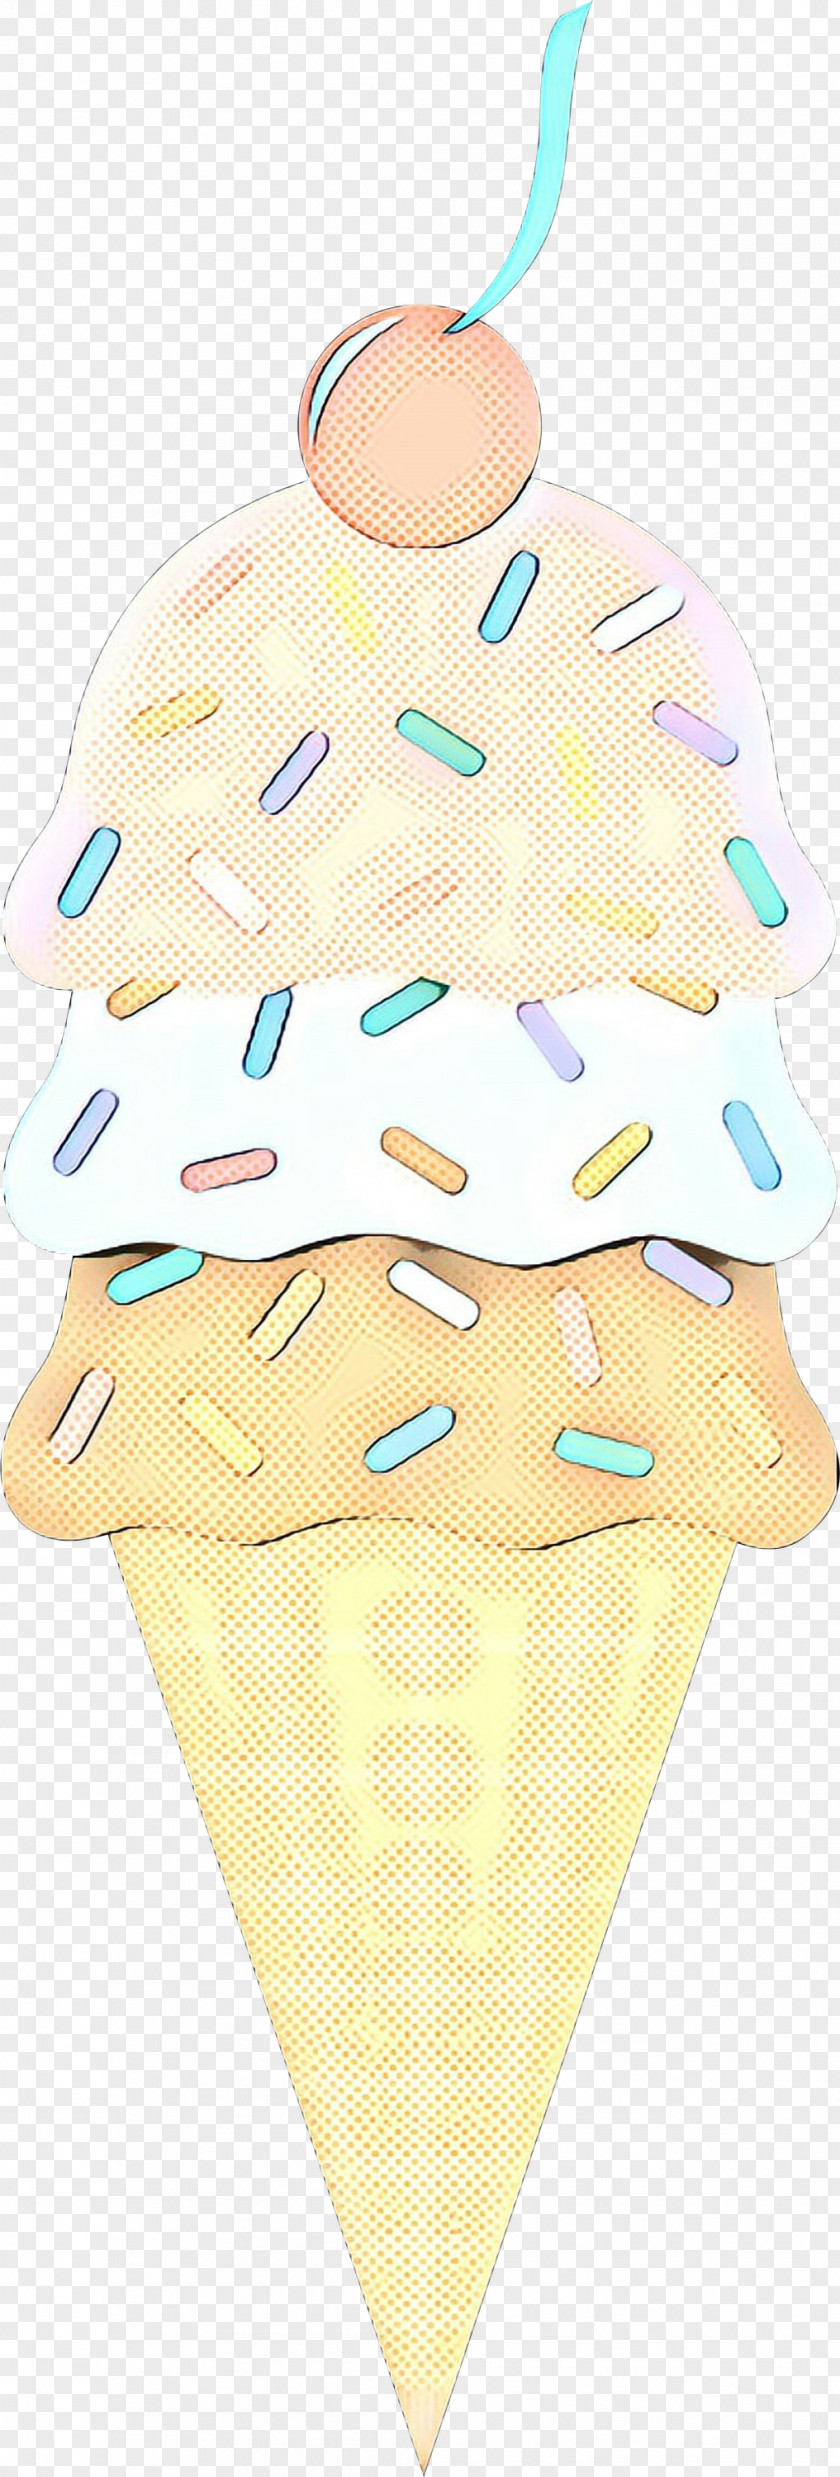 Baking Cup Polka Dot Ice Cream Cone Background PNG